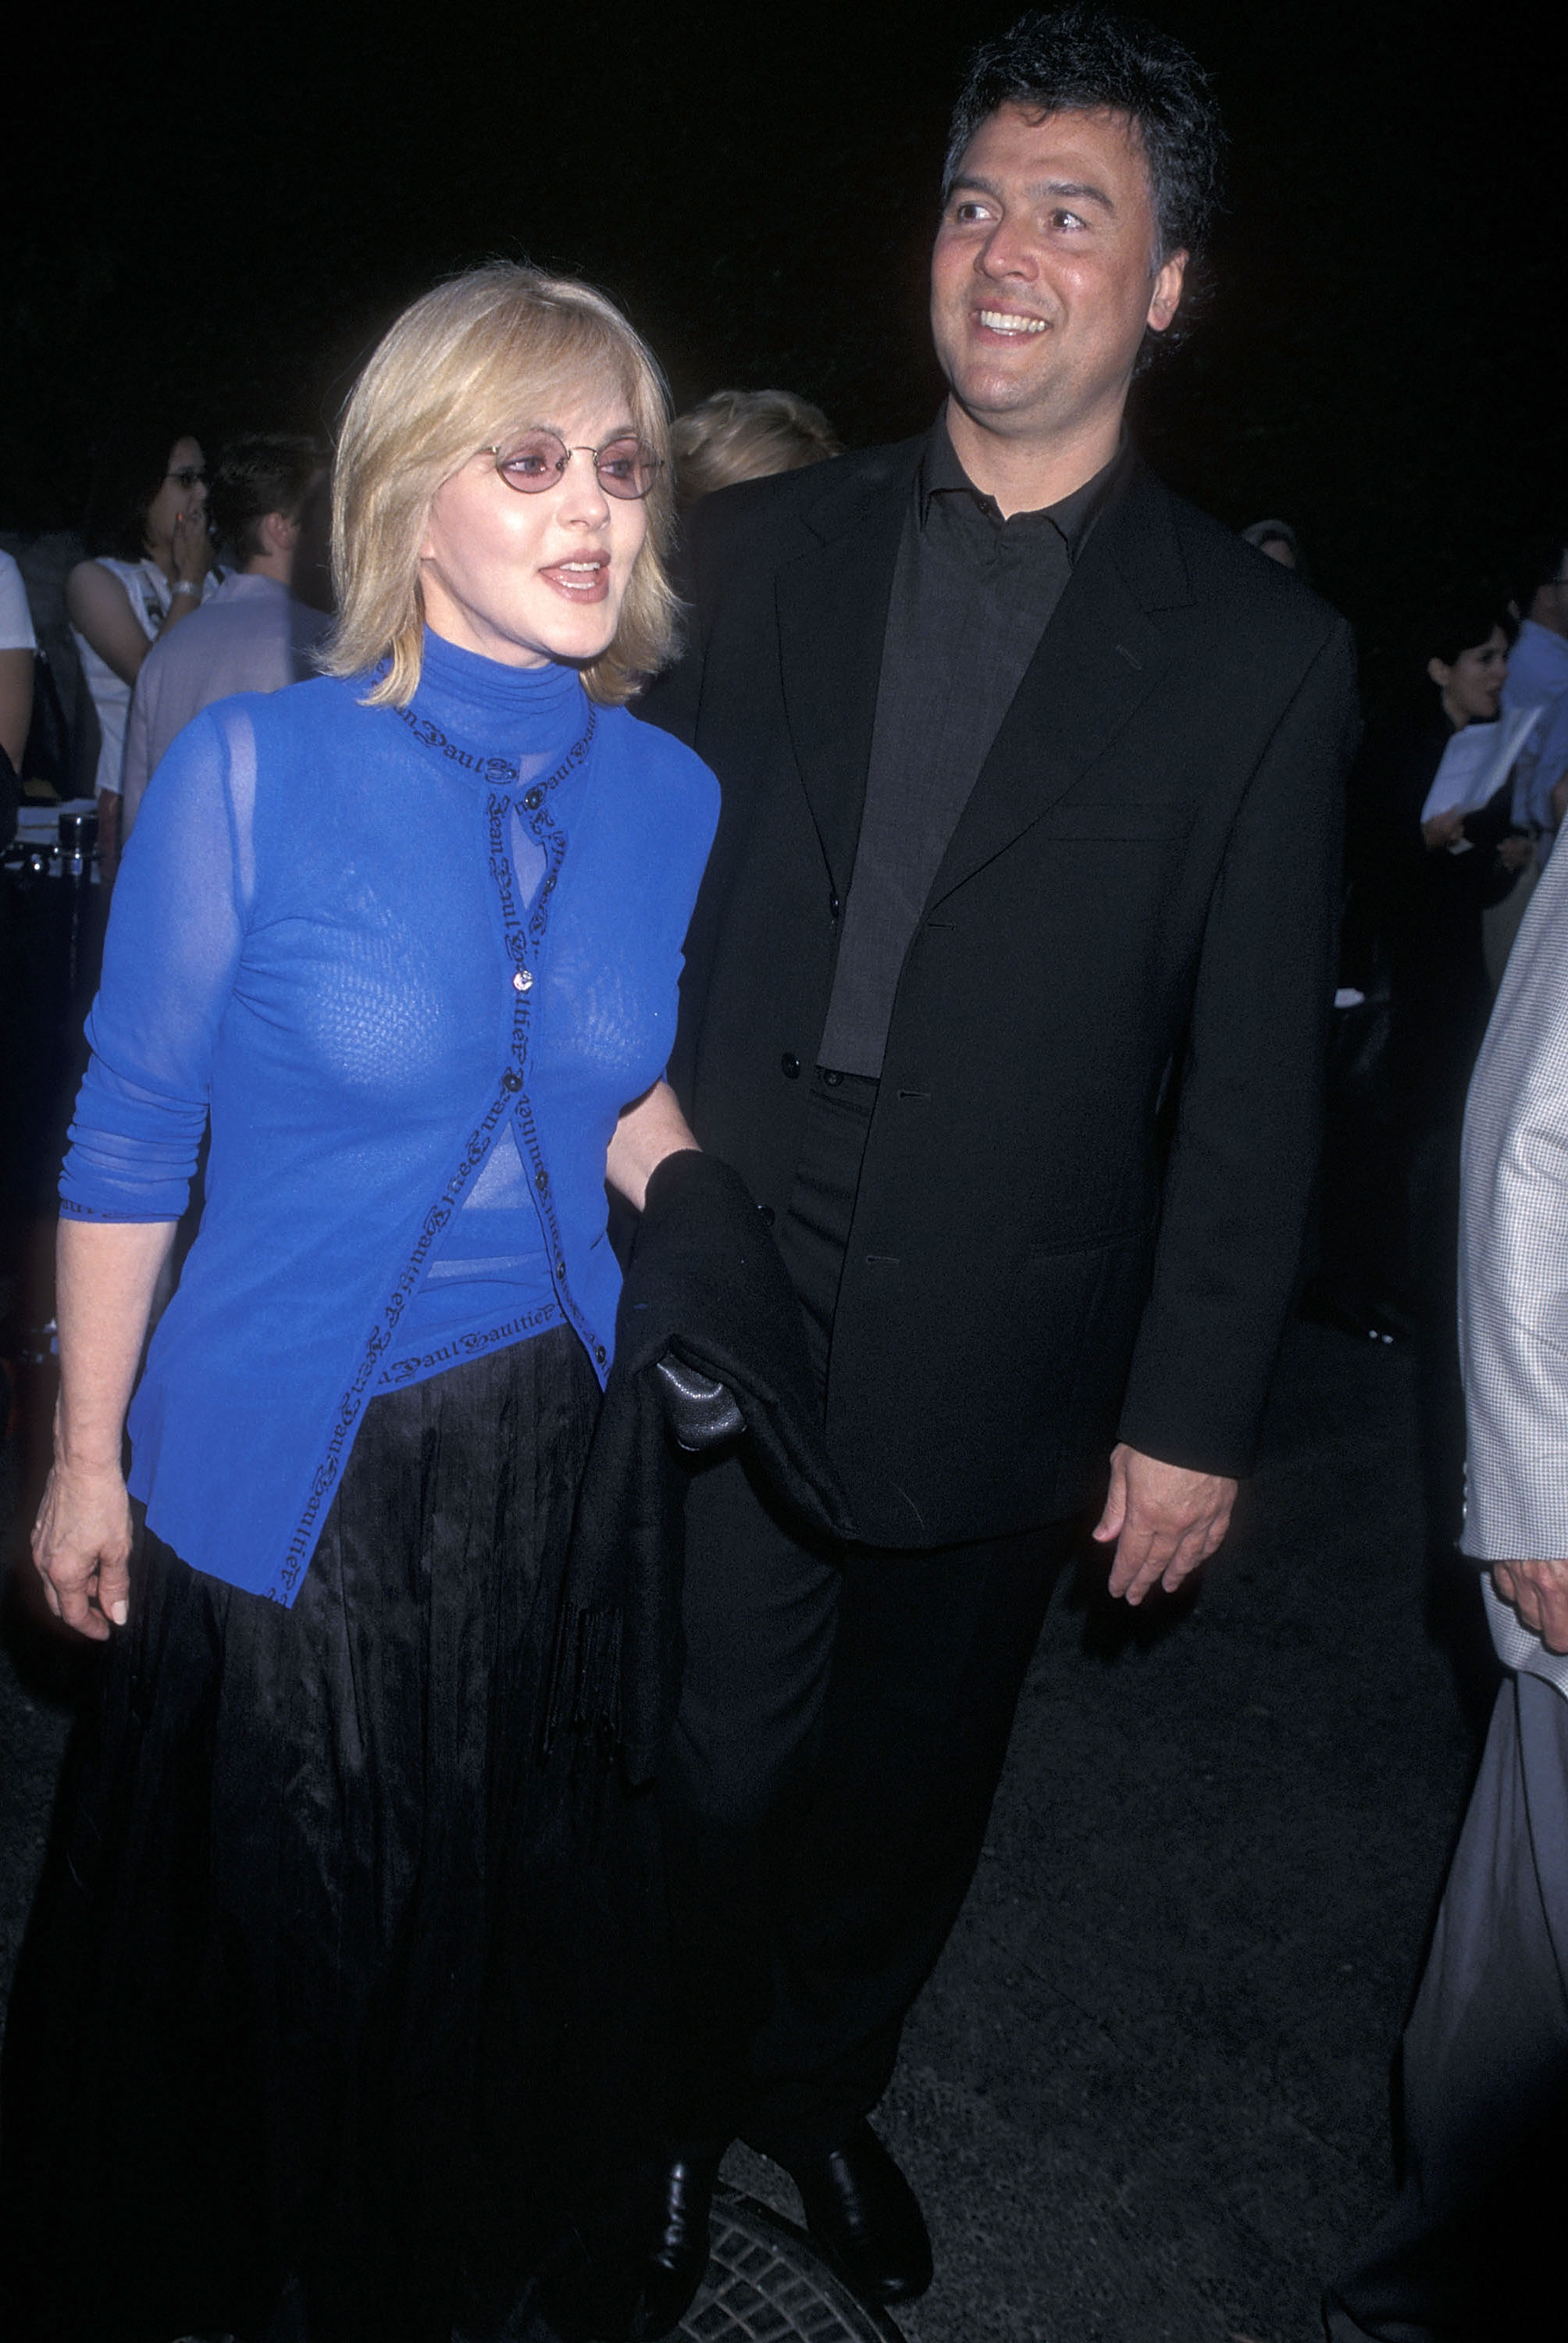 Priscilla Presley and Marco Garibaldi at the First Annual Hollywood Bowl Hall of Fame Salute to John Williams and Garth Brooks in California, on June 23, 2000. | Source: Getty Images